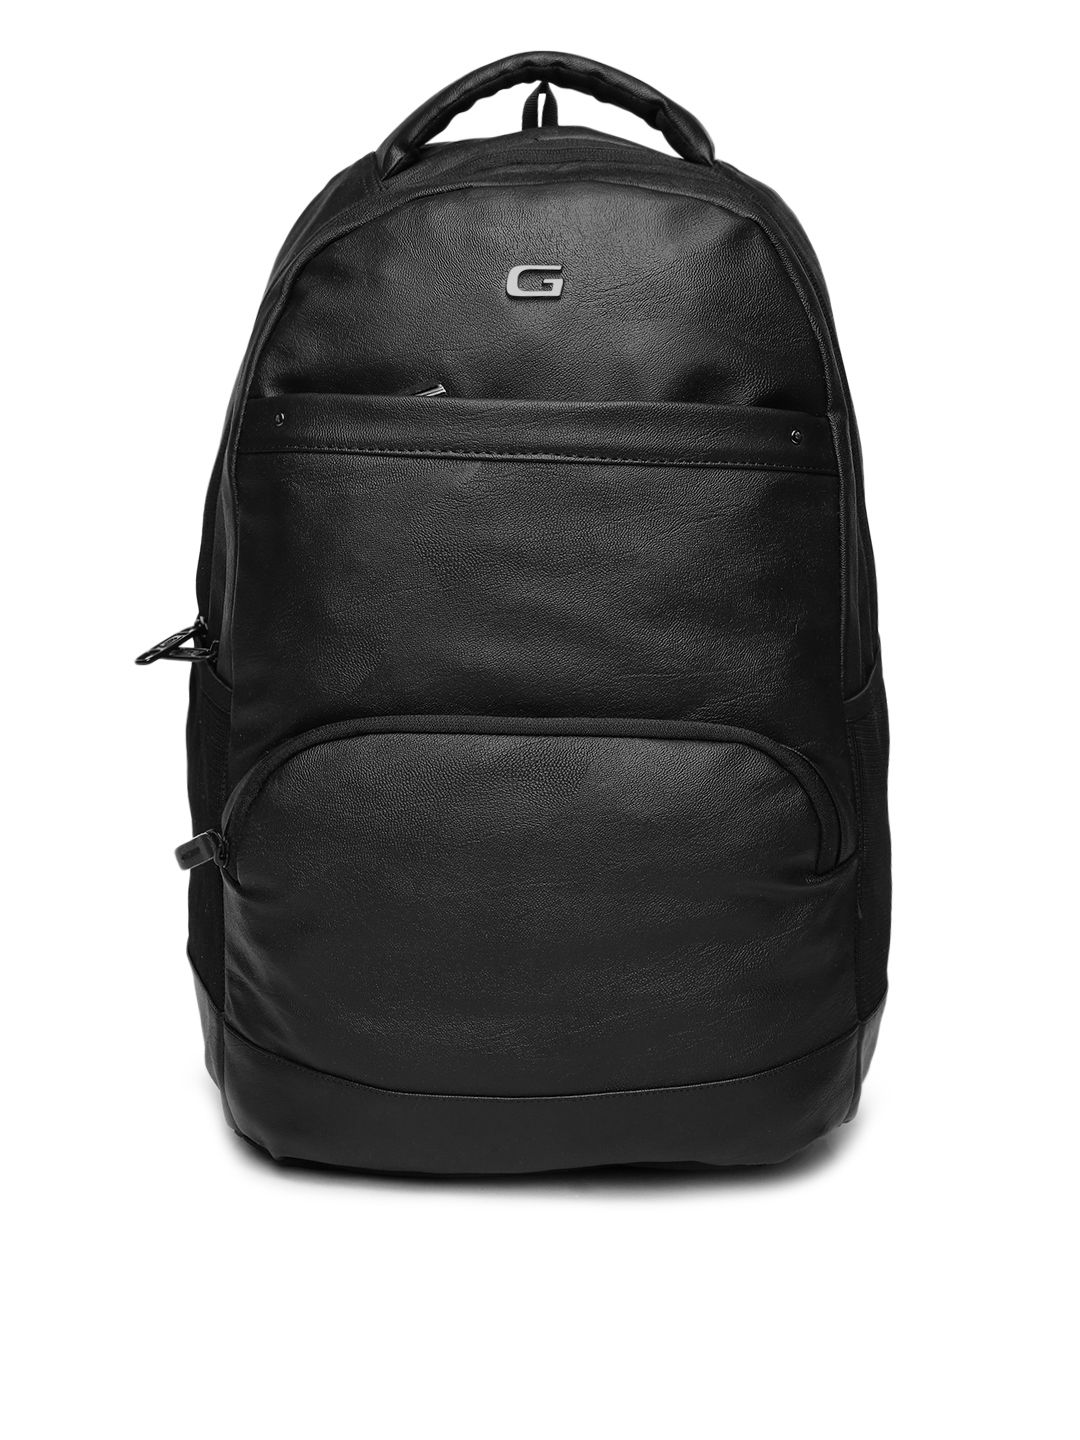 Gear Unisex Black Solid Backpack Price in India